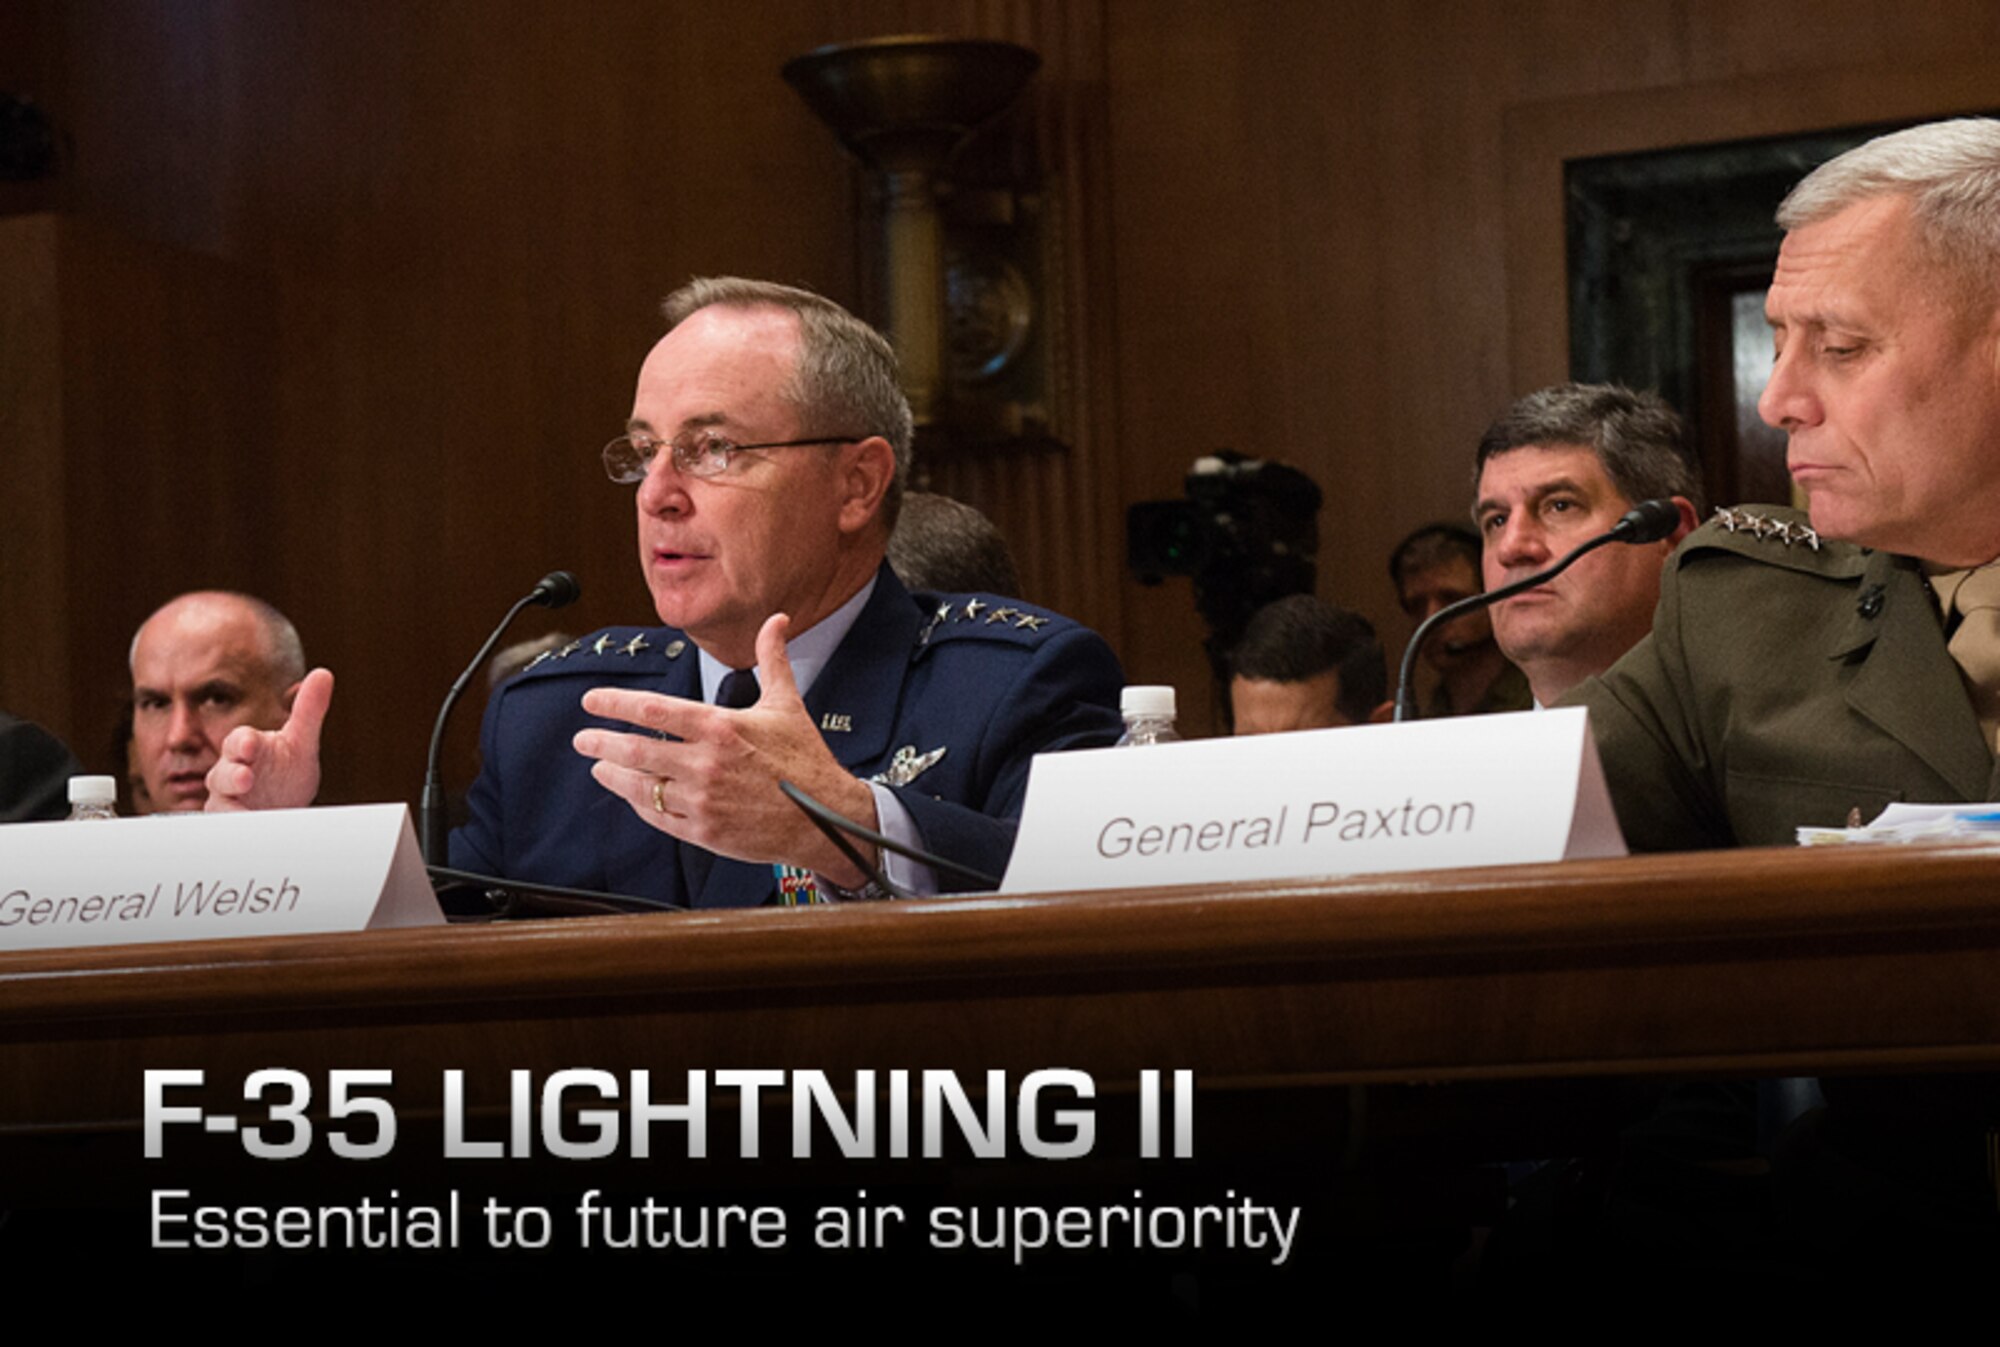 Air Force Chief of Staff Gen. Mark A. Welsh III (center) answers a question posed to him from a subcommittee member during a hearing of the Senate Appropriations Committee, Defense Subcommittee, on Capitol Hill, Washington, D.C., June 19, 2013.The subcommittee met to receive testimony on the F-35 Lightning II, joint strike fighter fiscal 2014 budget request. During the hearing, Welsh talked about the importance of the aircraft for national security and helping provide air superiority for joint operations. Along with Welsh providing testimony were: Frank Kendall, under secretary for Acquisition, Technology and Logistics; U.S. Navy Adm. Jonathan Greenert, chief of Naval Operations, left; Gen. John M. Paxton, Jr., assistant commandant of the Marine Corps, right; and Lt. Gen. Christopher C. Bogdan, the program executive officer for the Department of Defense's  F-35 Lightning II Joint Program Office. (U.S. Air Force photo/Jim Varhegyi)